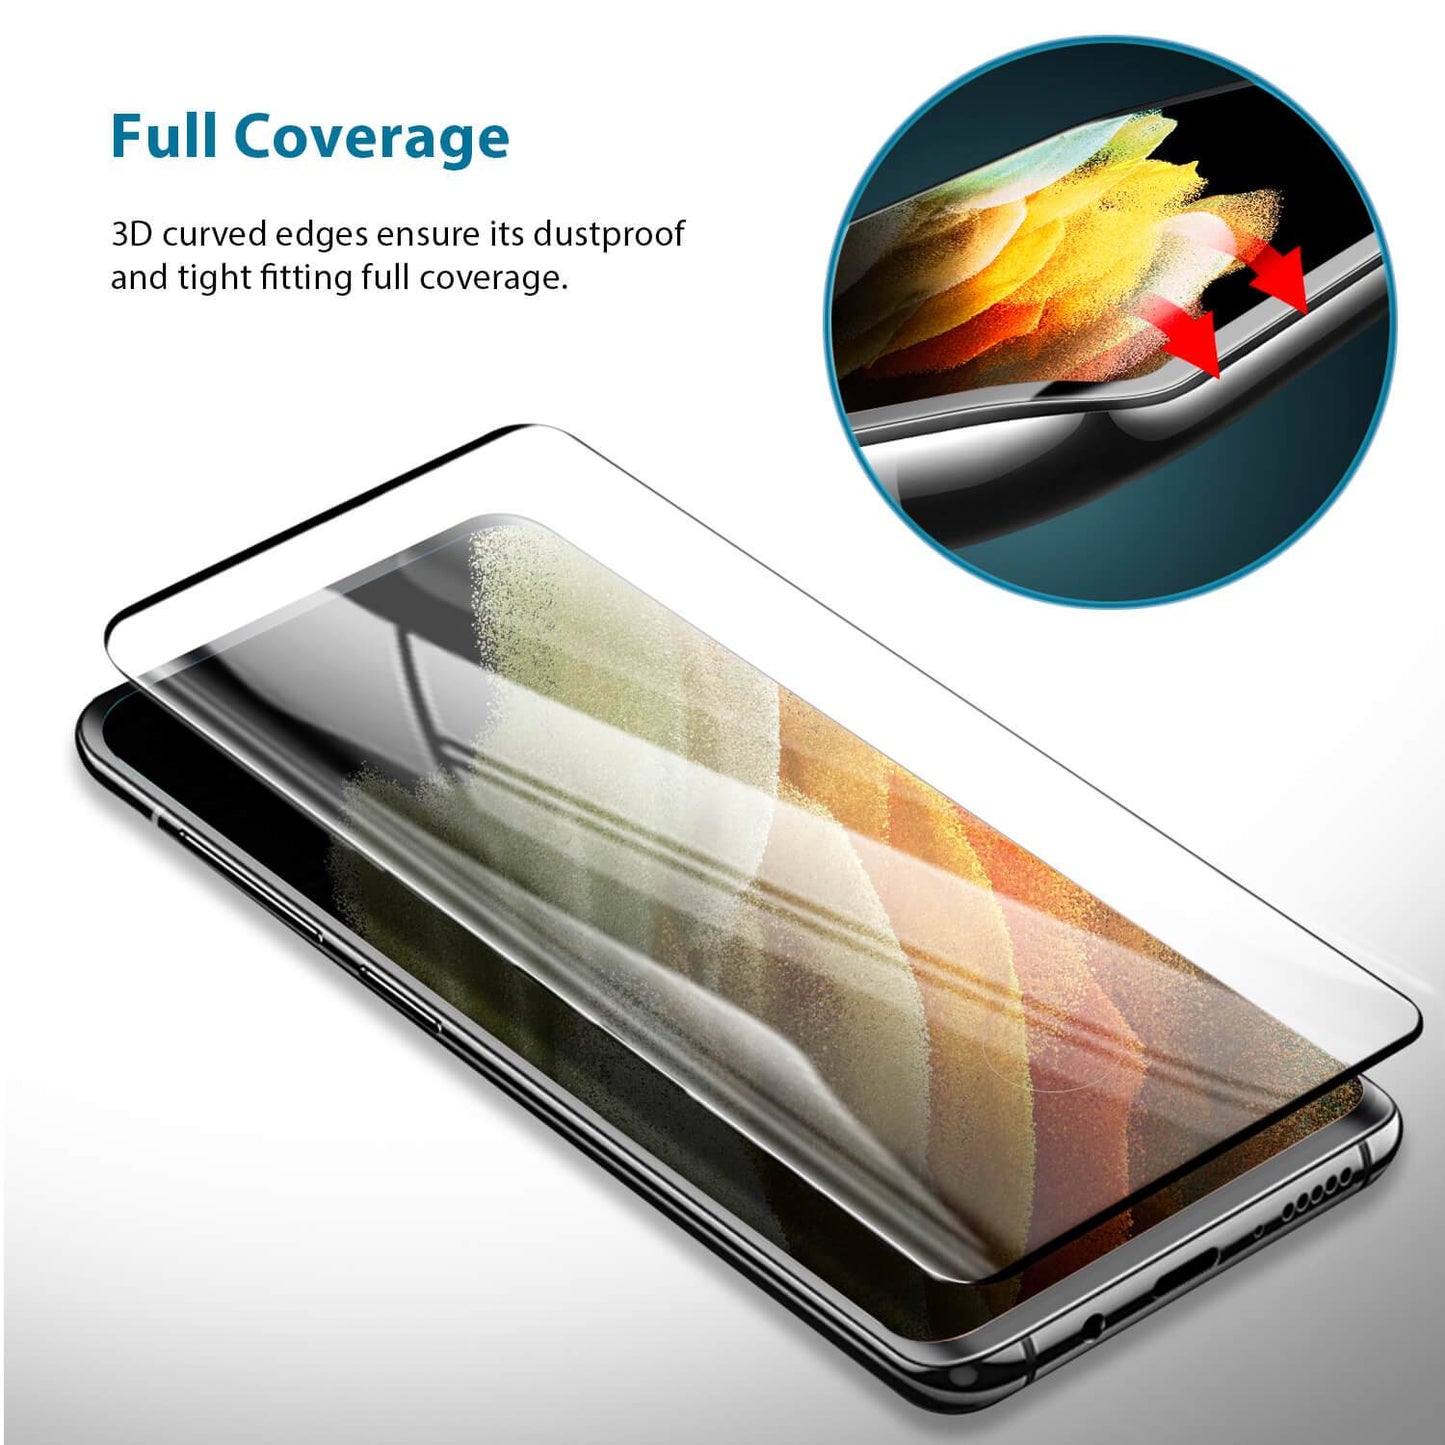 Tough On Samsung Galaxy S21 Ultra 5G Screen Protector 3D Full Cover Glass Vipo